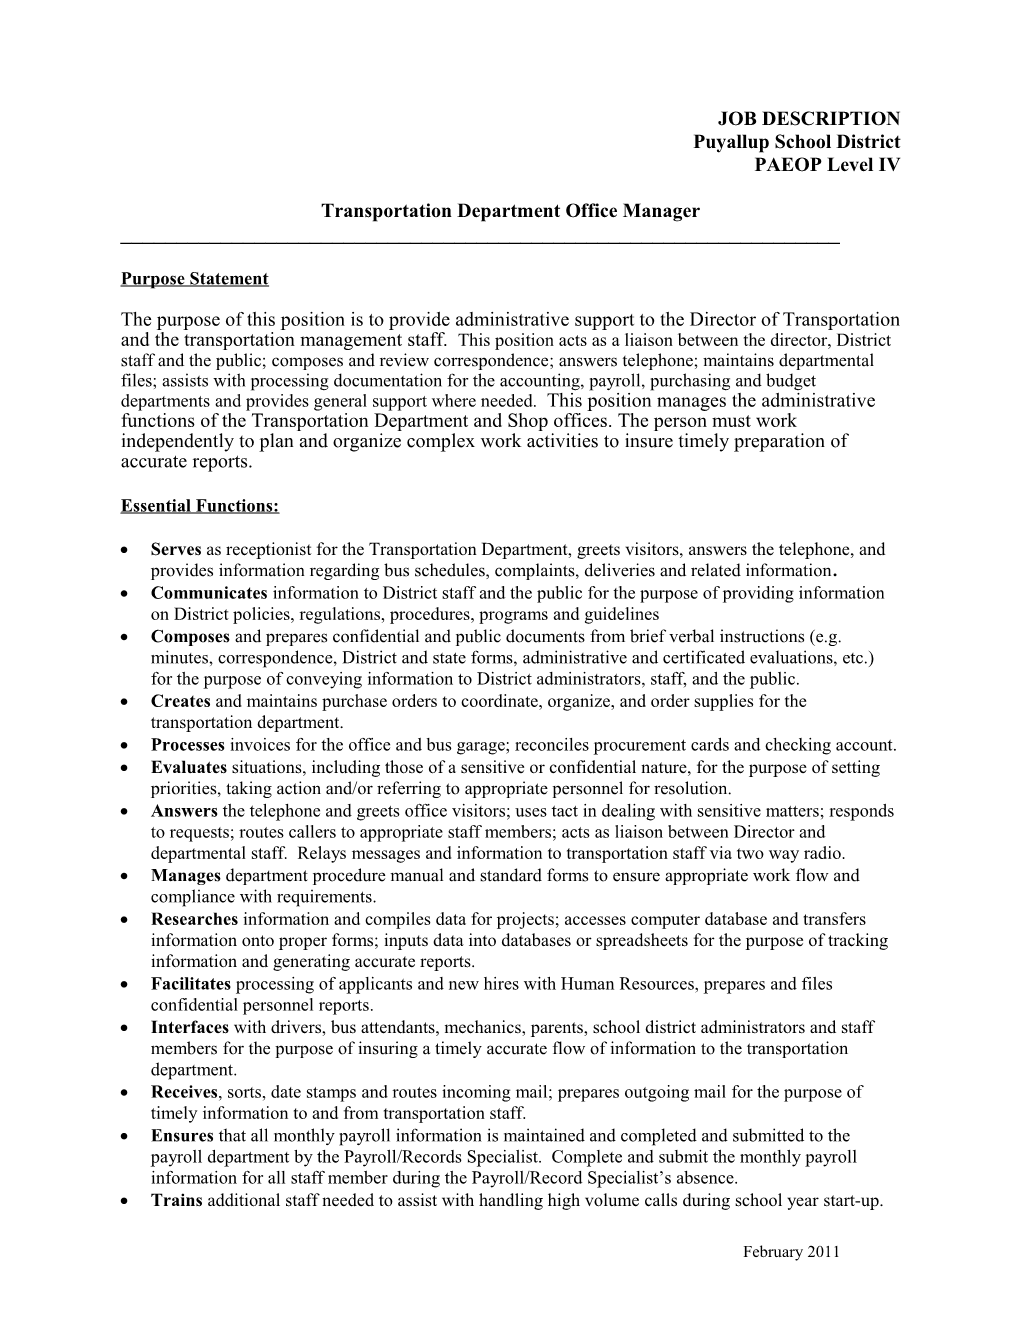 Transportation Department Office Manager